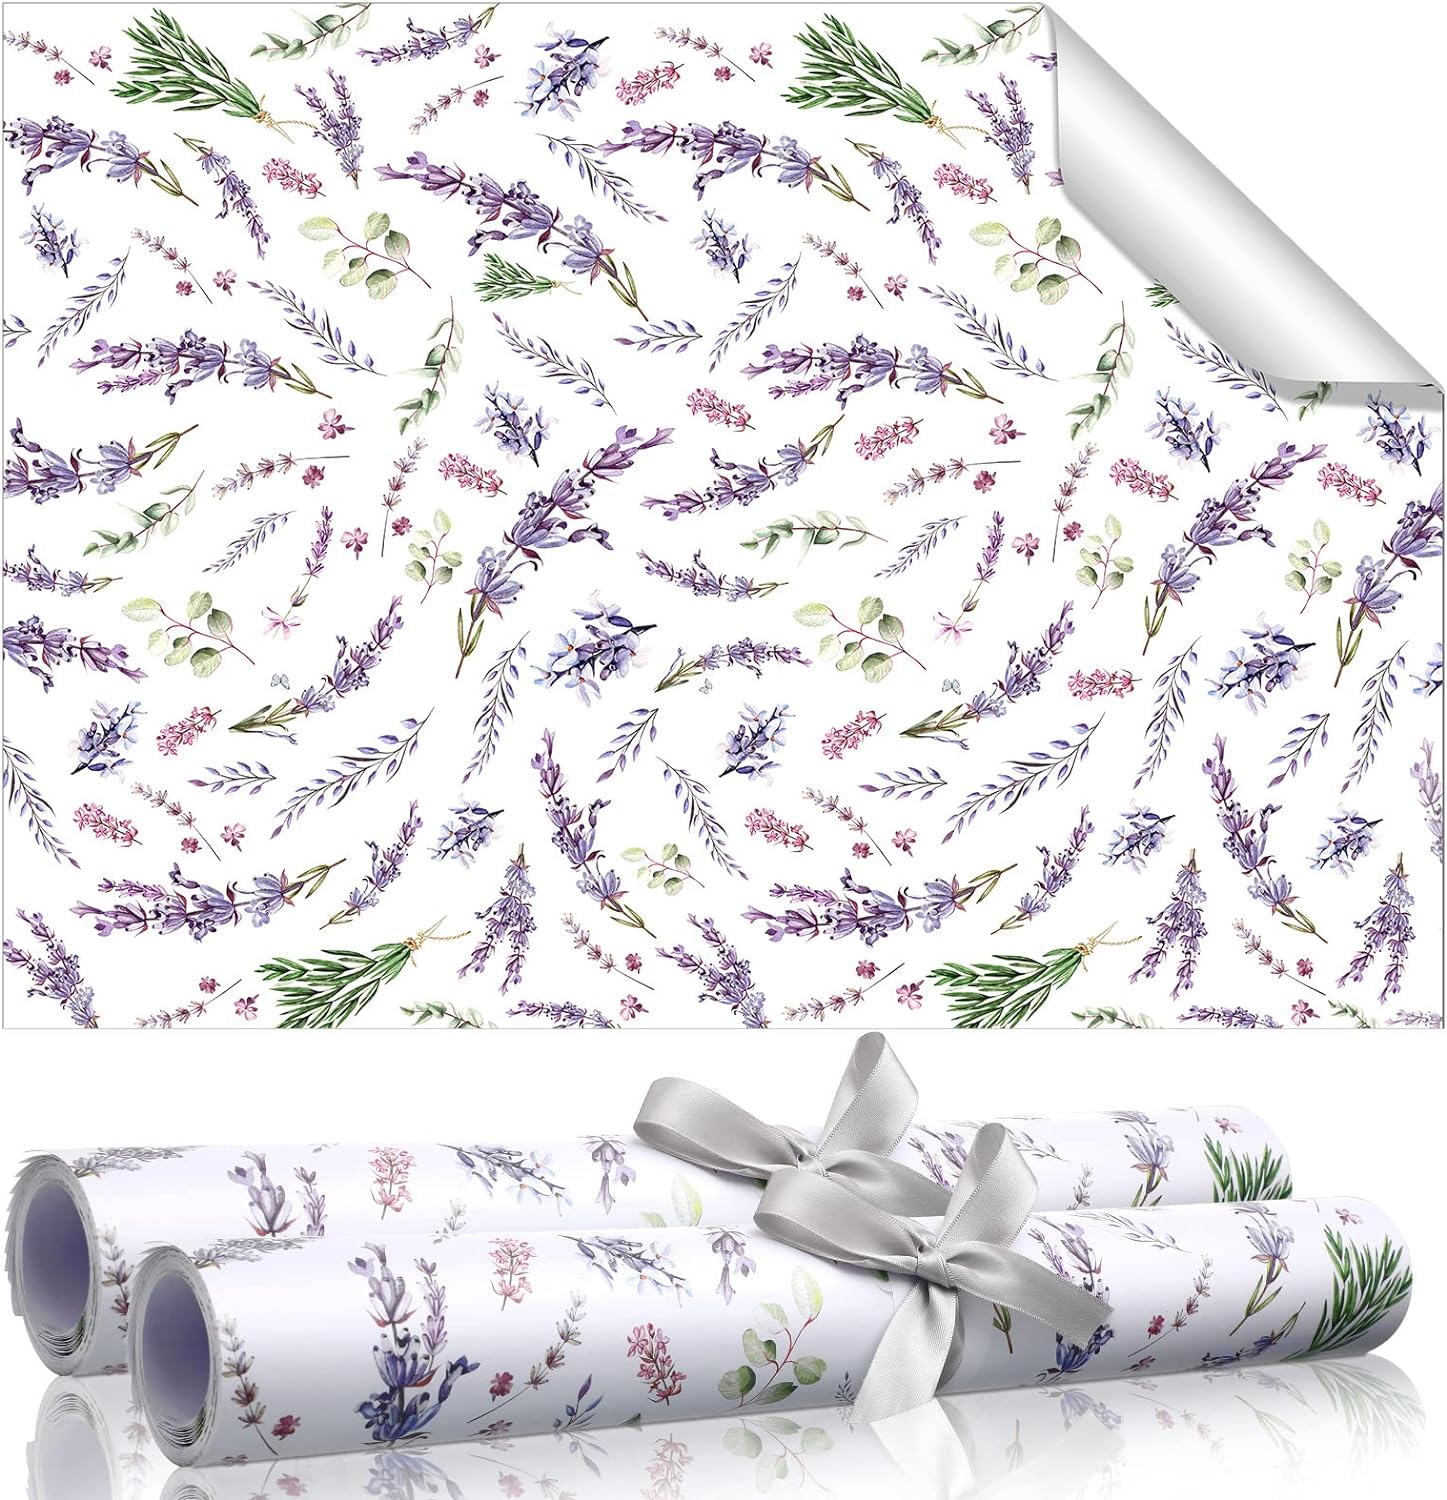 BBTO 20 Sheet Fragrant Drawer Liners for Dresser Scented Cabinet Liners for Shelves 15.8x22 Paper Liner for Drawers and Cabinets Non Adhesive Drawer Paper Liner for Home Shelf Close (Lavender)